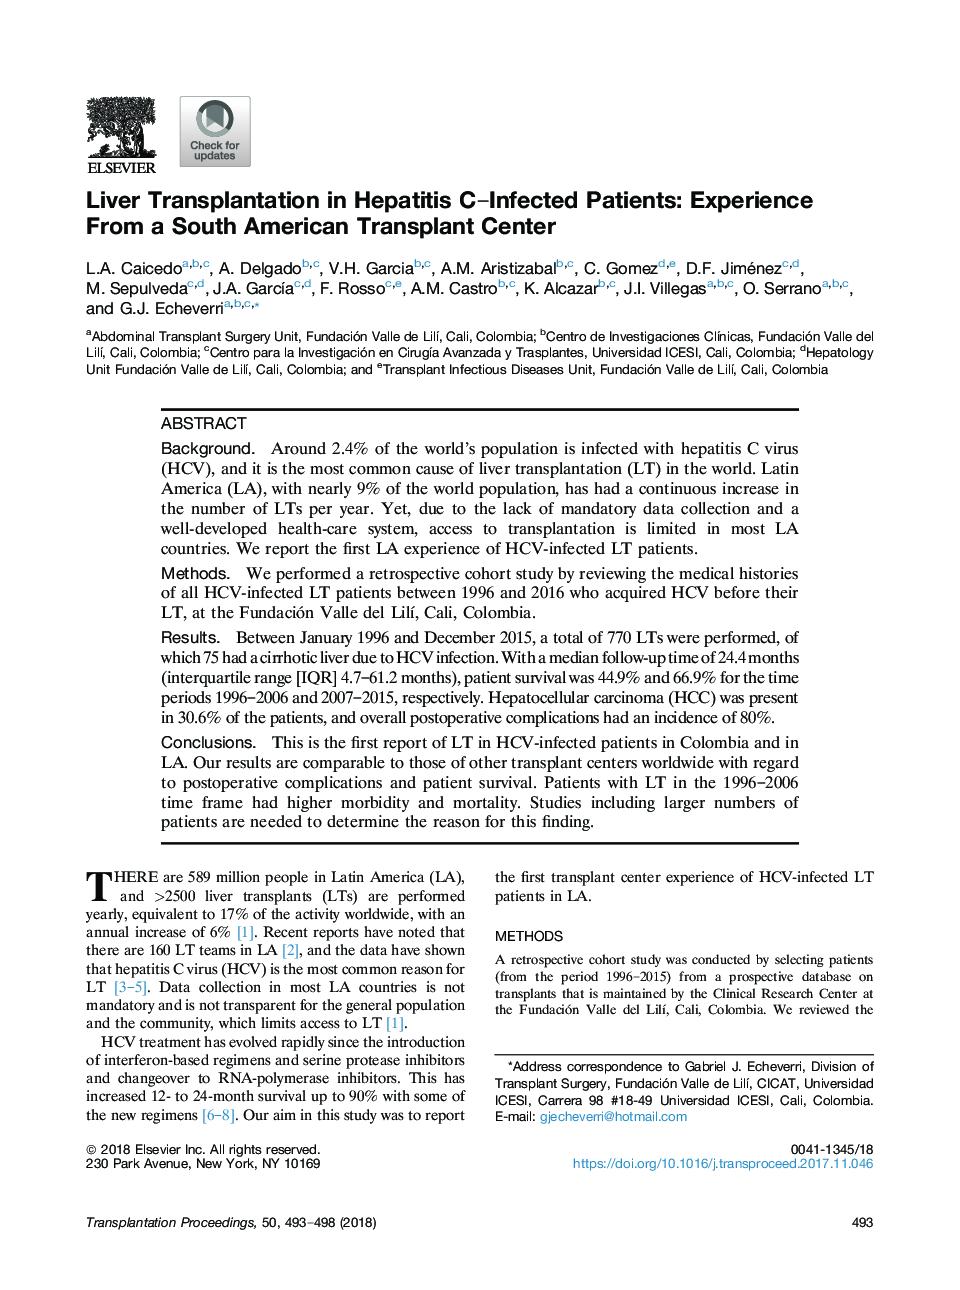 Liver Transplantation in Hepatitis C-Infected Patients: Experience From a South American Transplant Center